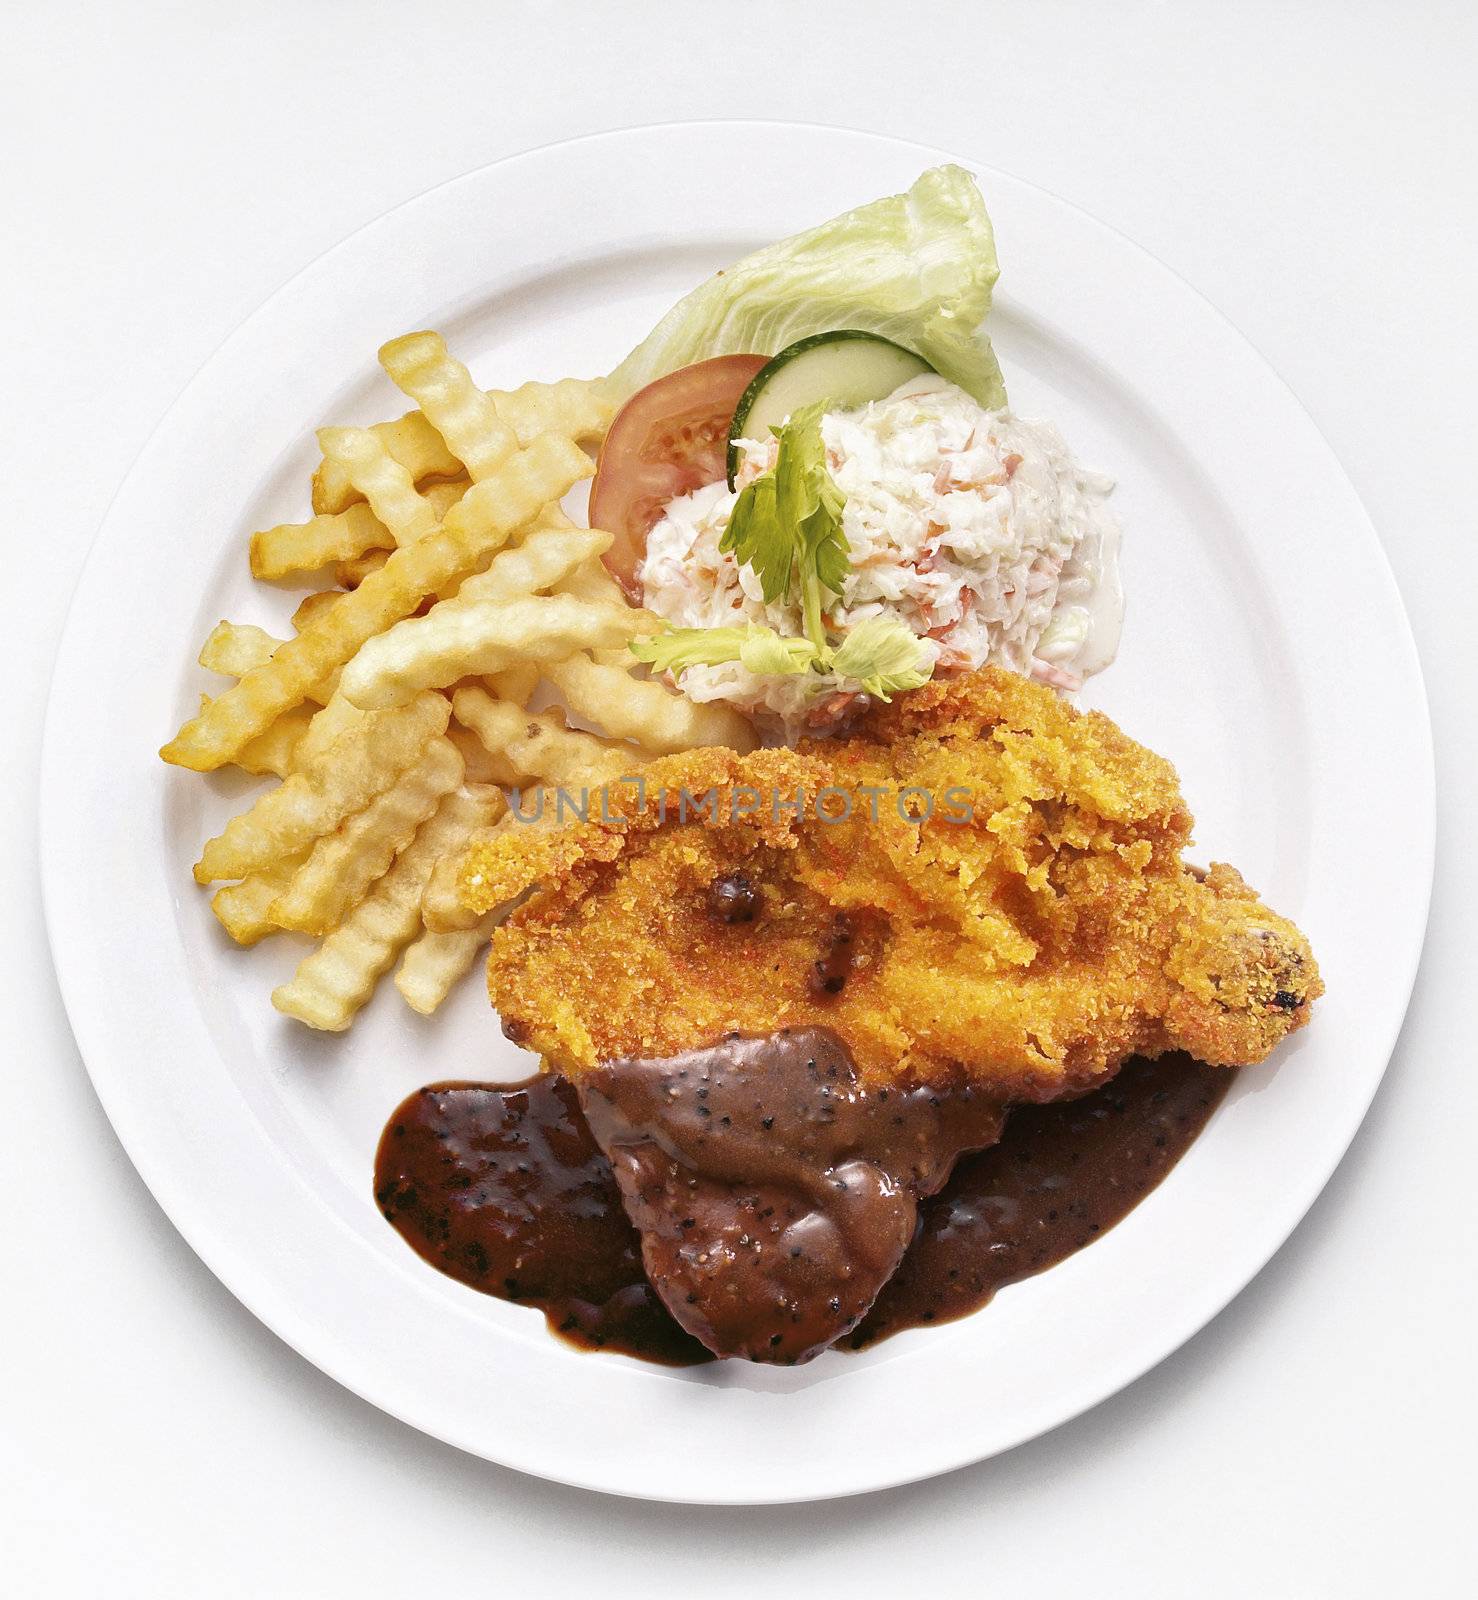 fried chicken chop with side dishes